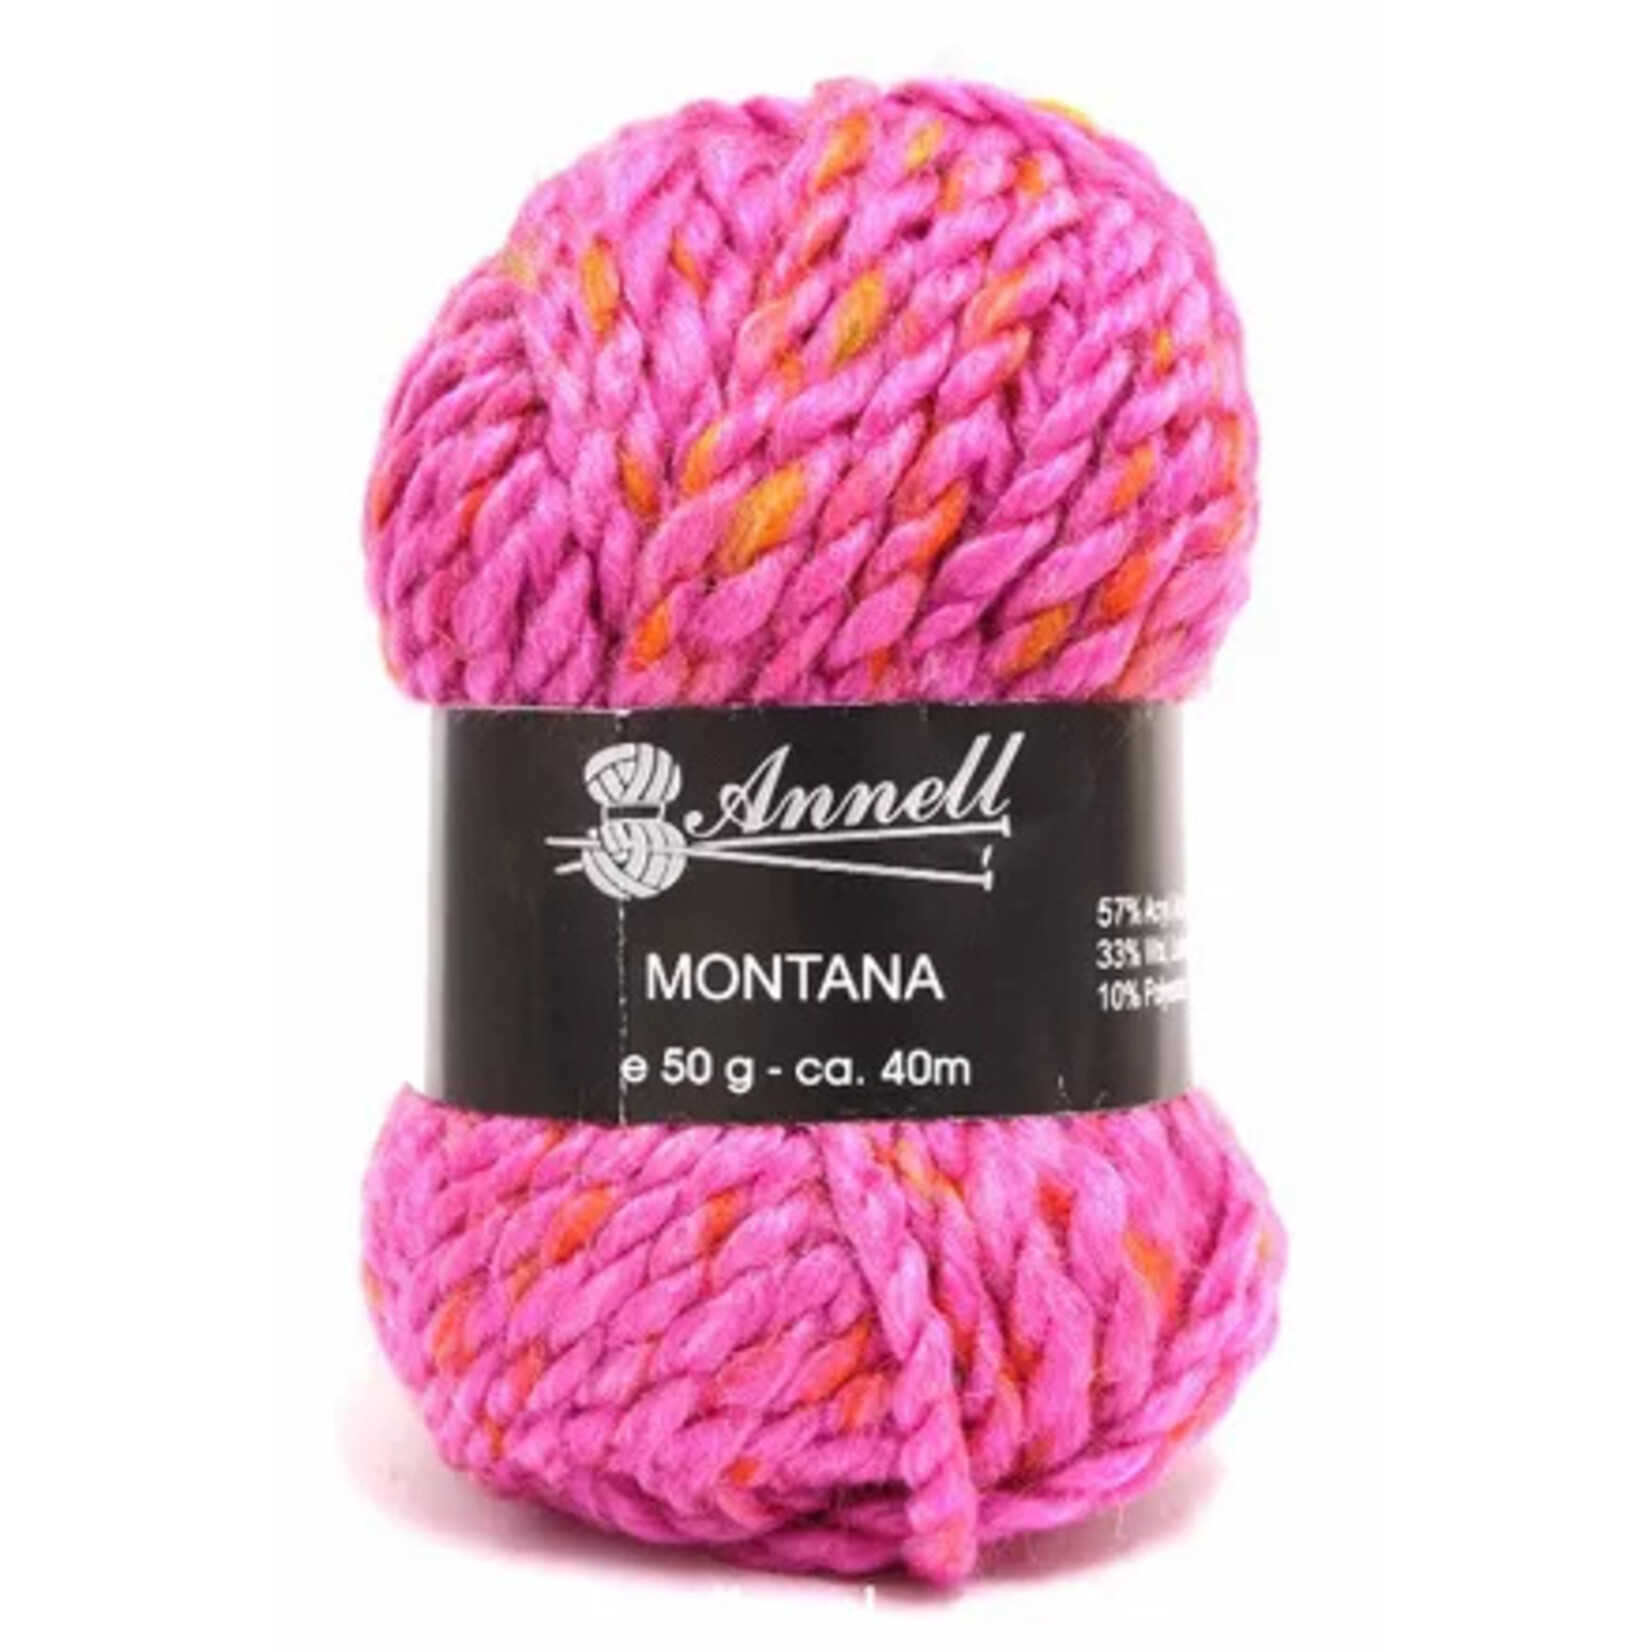 annell montana 5677